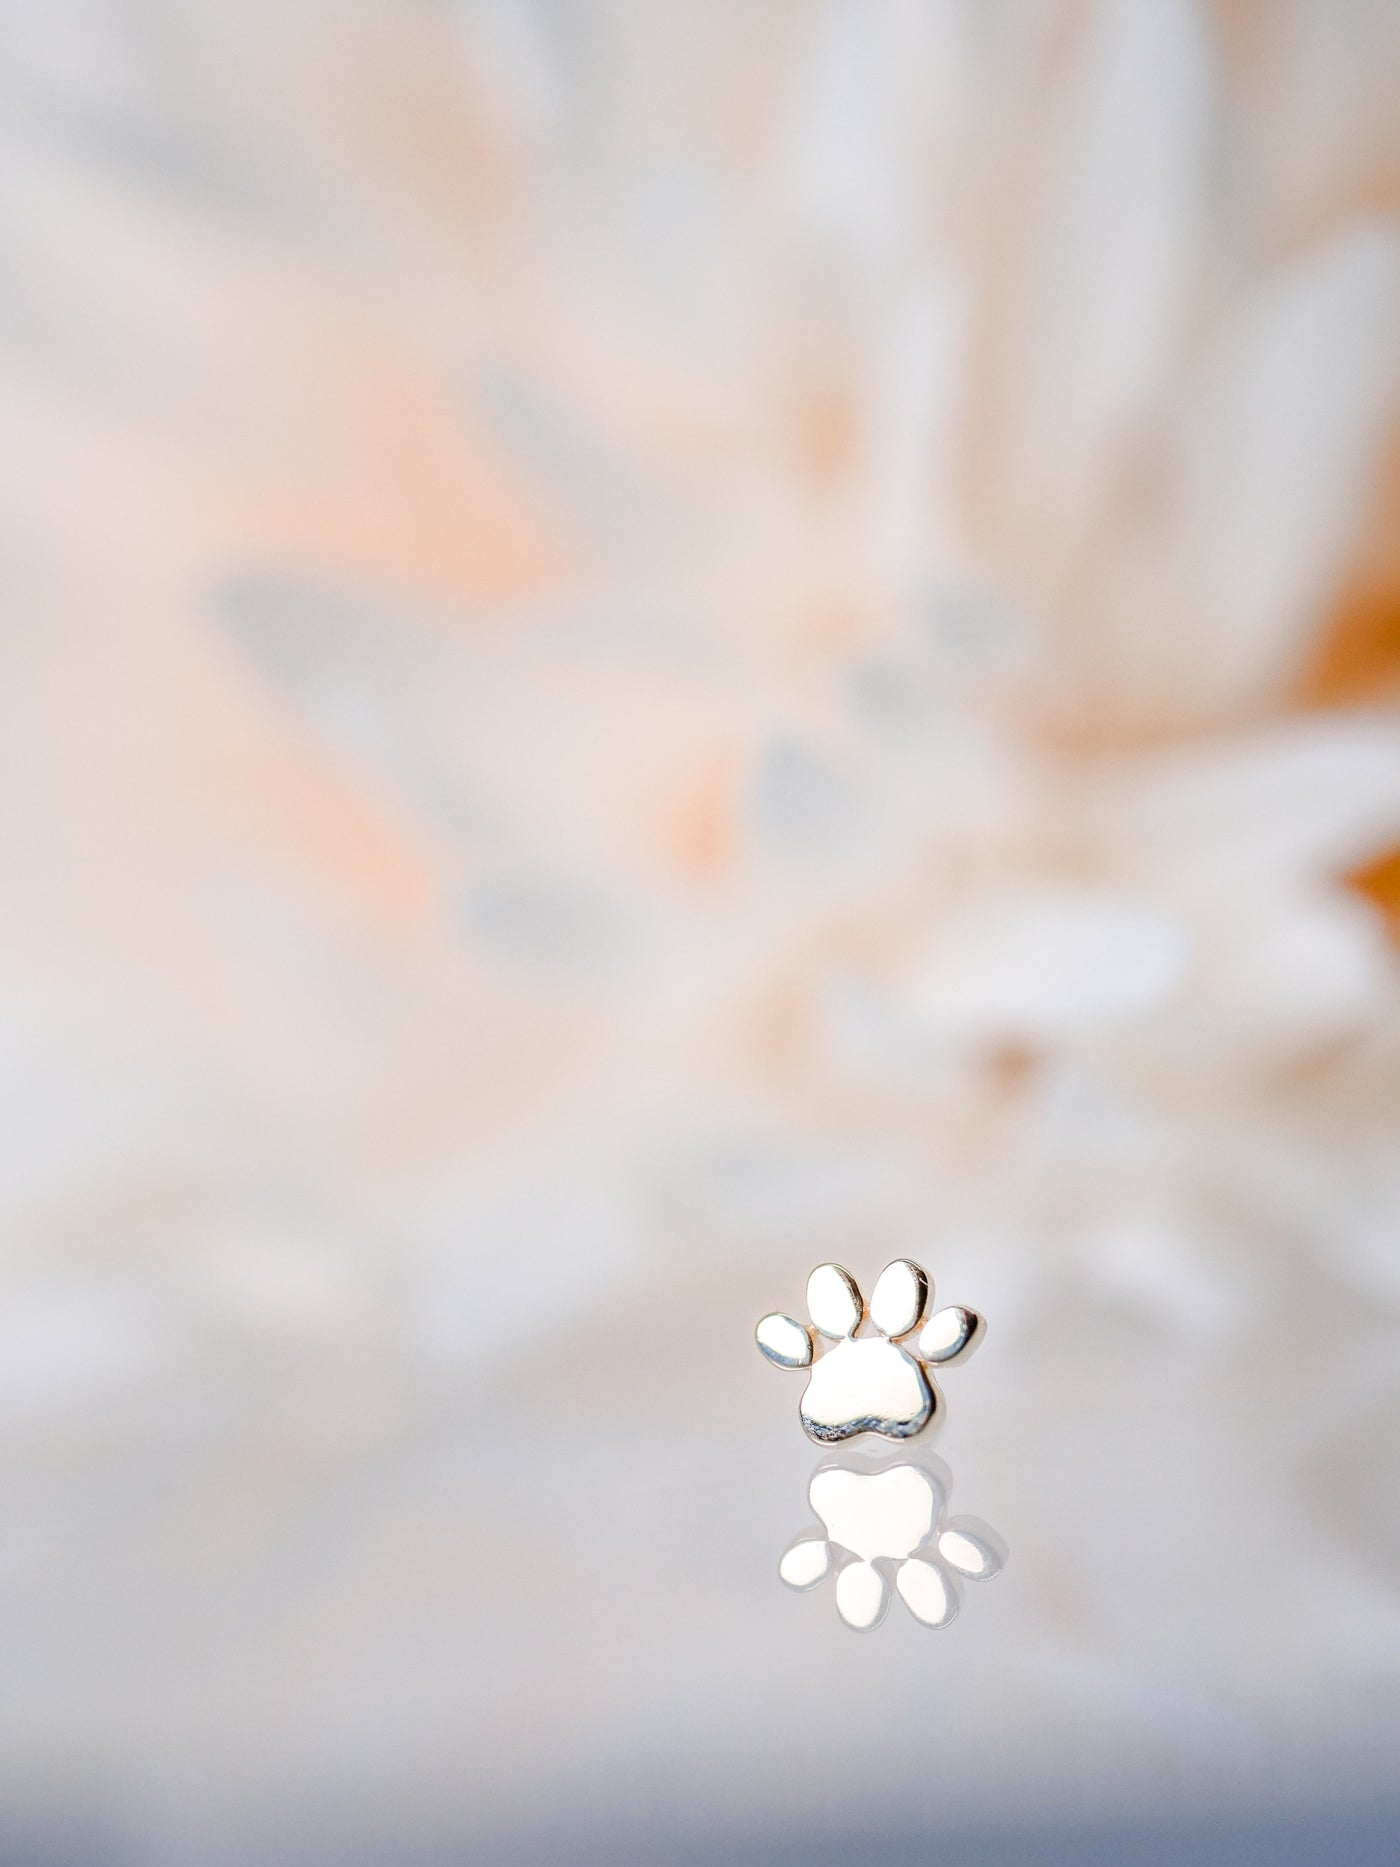 show your pet love with this cute pet paw print